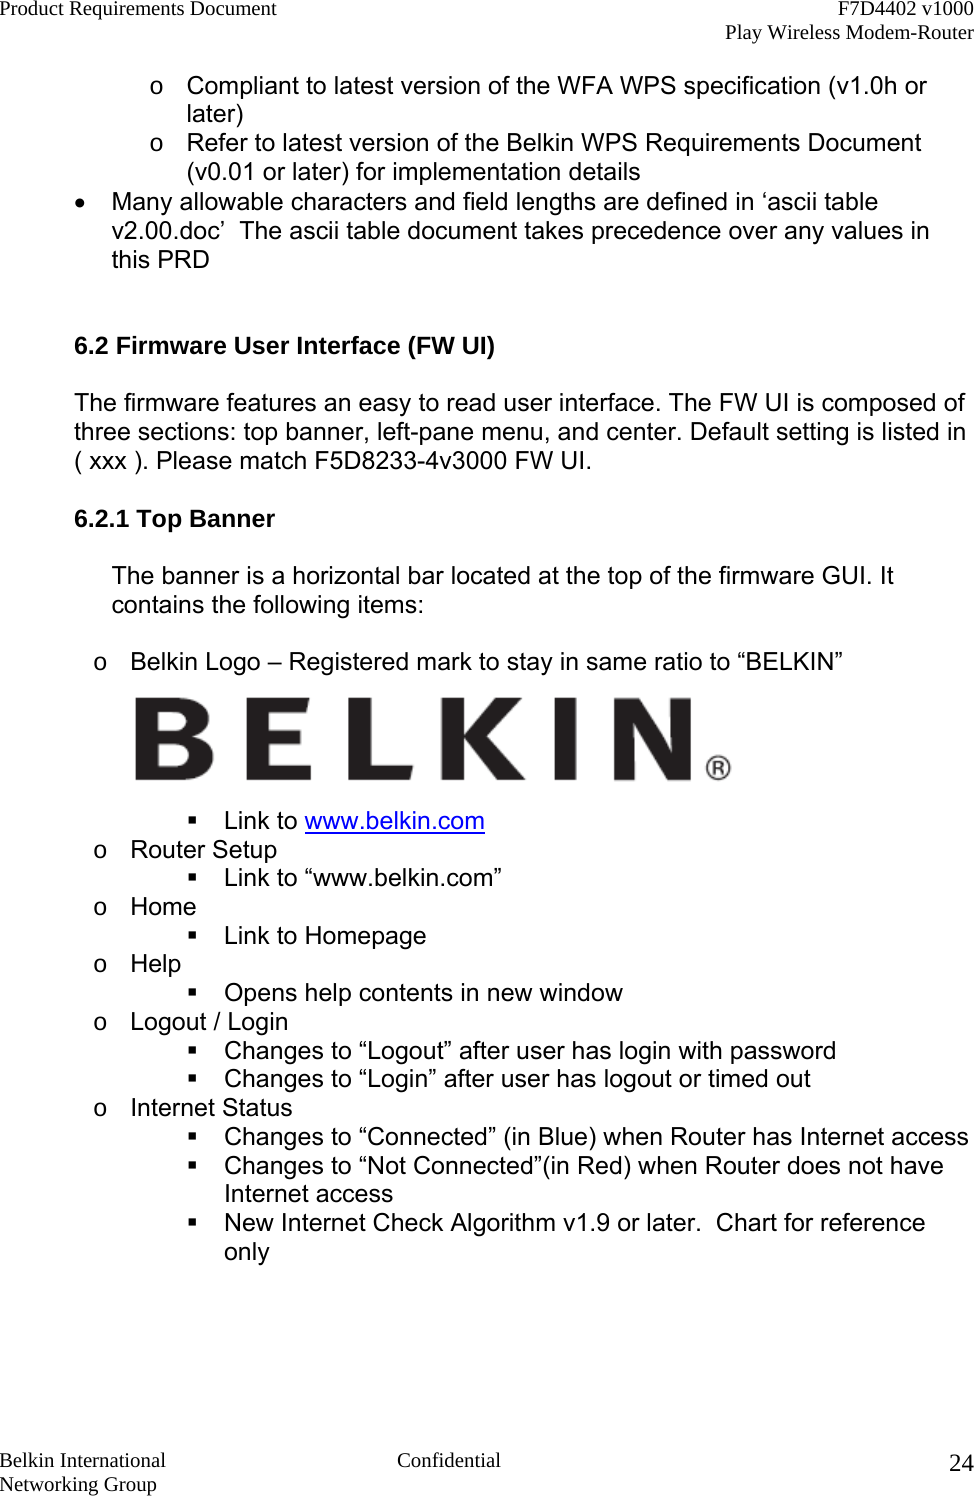 Product Requirements Document    F7D4402 v1000     Play Wireless Modem-Router  Belkin International  Confidential Networking Group 24o  Compliant to latest version of the WFA WPS specification (v1.0h or later) o  Refer to latest version of the Belkin WPS Requirements Document (v0.01 or later) for implementation details •  Many allowable characters and field lengths are defined in ‘ascii table v2.00.doc’  The ascii table document takes precedence over any values in this PRD   6.2 Firmware User Interface (FW UI)  The firmware features an easy to read user interface. The FW UI is composed of three sections: top banner, left-pane menu, and center. Default setting is listed in  ( xxx ). Please match F5D8233-4v3000 FW UI.  6.2.1 Top Banner  The banner is a horizontal bar located at the top of the firmware GUI. It contains the following items:  o  Belkin Logo – Registered mark to stay in same ratio to “BELKIN”   Link to www.belkin.com o  Router Setup  Link to “www.belkin.com” o  Home  Link to Homepage o  Help  Opens help contents in new window o  Logout / Login  Changes to “Logout” after user has login with password  Changes to “Login” after user has logout or timed out  o  Internet Status  Changes to “Connected” (in Blue) when Router has Internet access  Changes to “Not Connected”(in Red) when Router does not have Internet access  New Internet Check Algorithm v1.9 or later.  Chart for reference only   